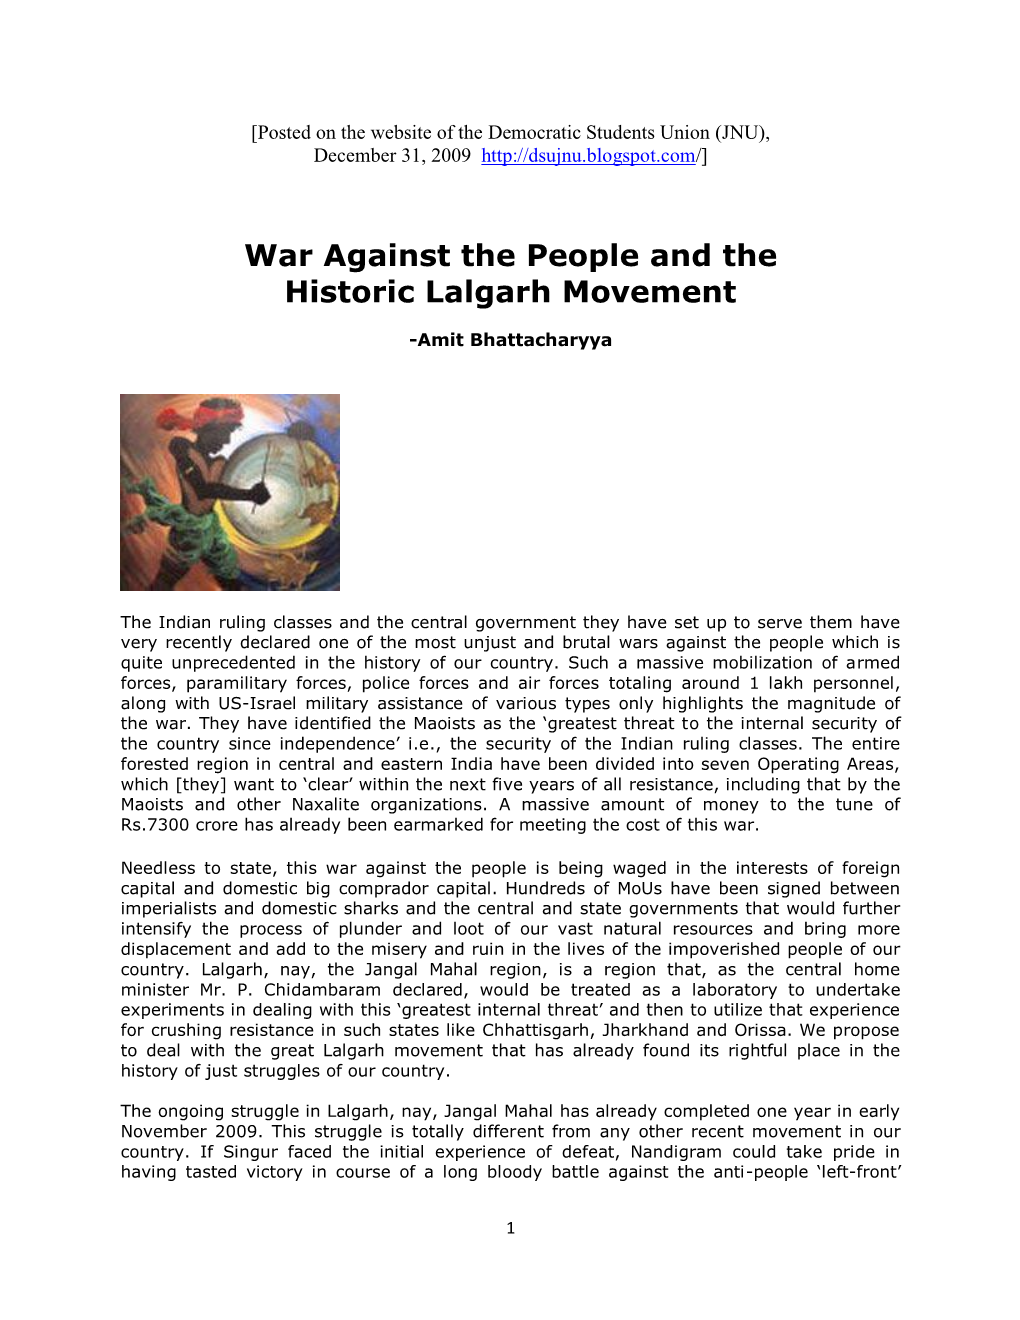 War Against the People and the Historic Lalgarh Movement